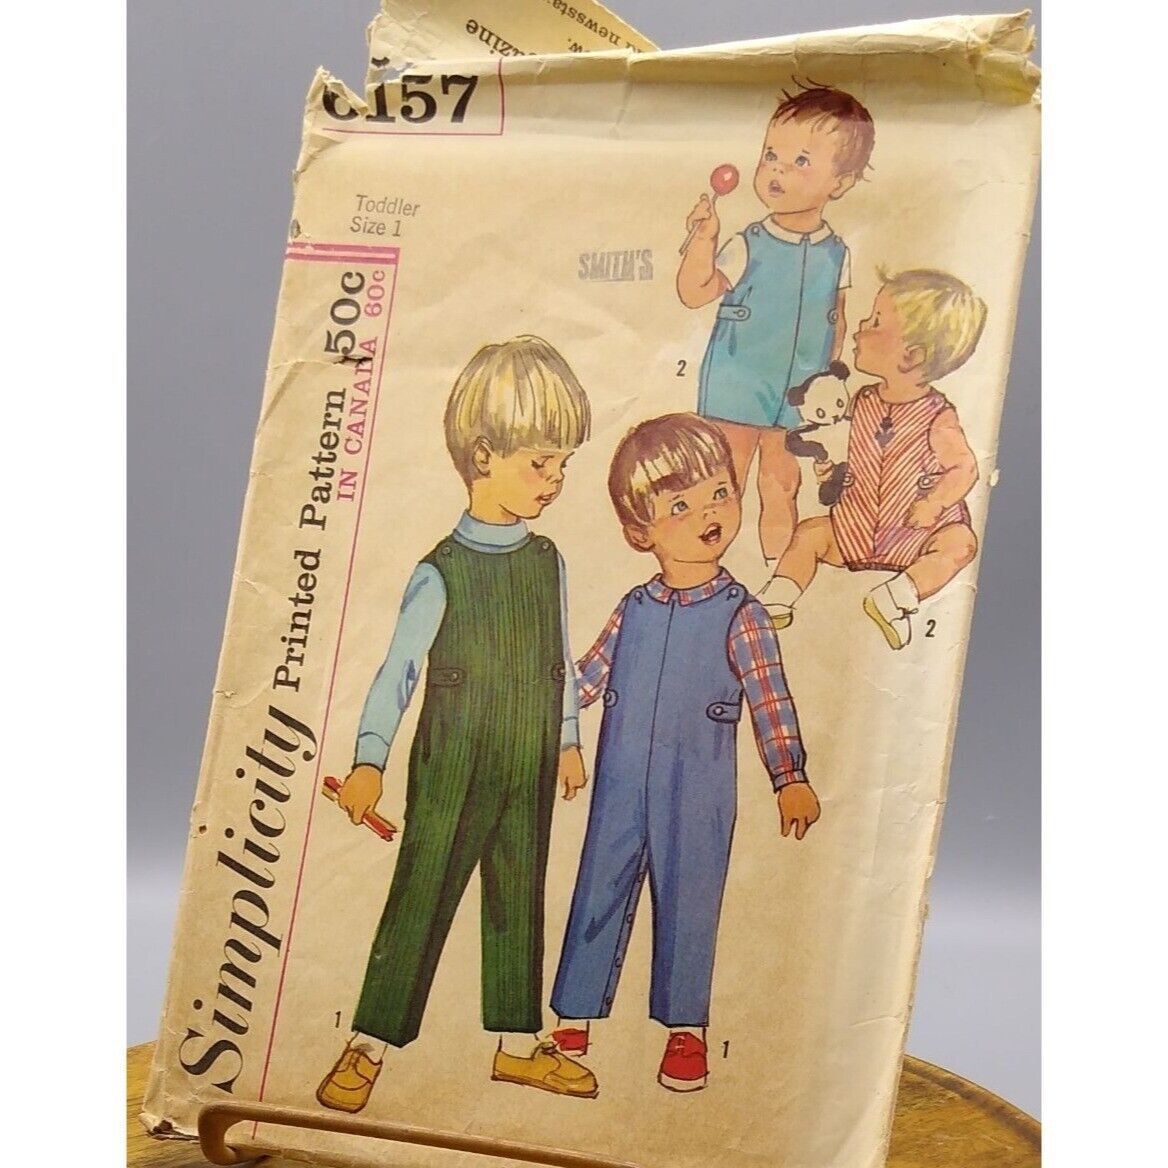 Primary image for Vintage Sewing PATTERN Simplicity 6157, Child Overalls 1965, Size 1 Size 2